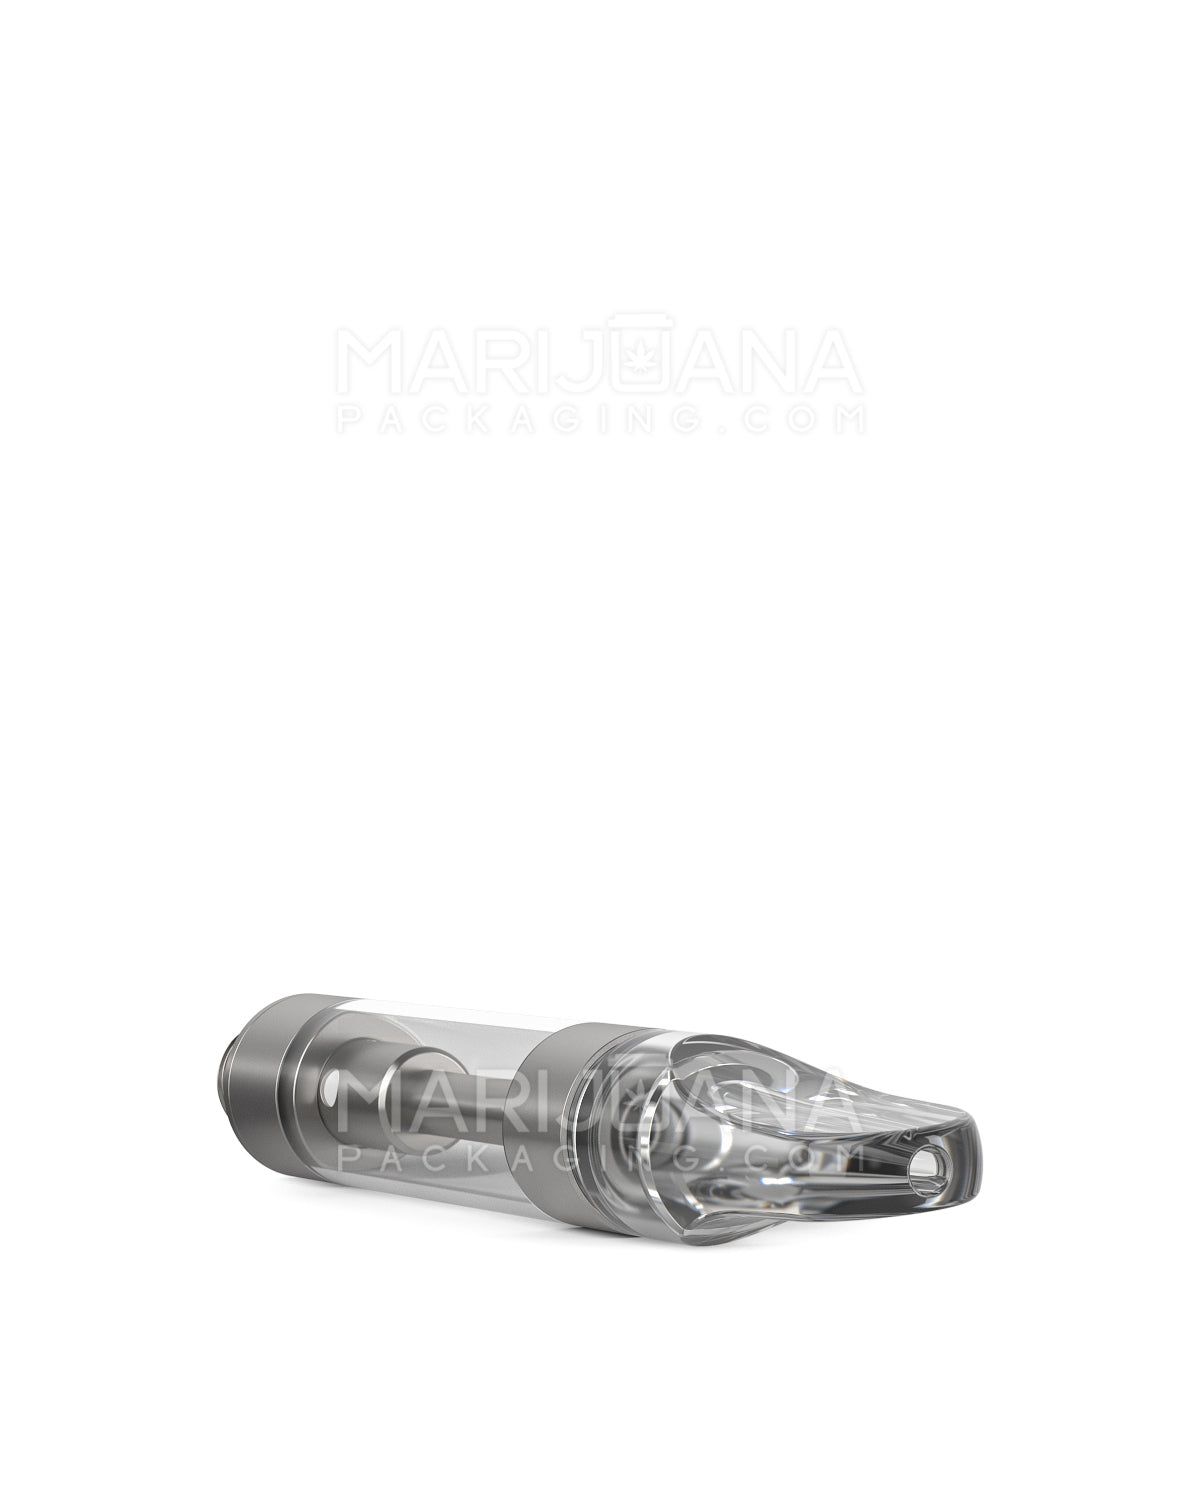 CCELL | Liquid6 Reactor Plastic Vape Cartridge with Clear Plastic Mouthpiece | 1mL - Press On - 100 Count - 6